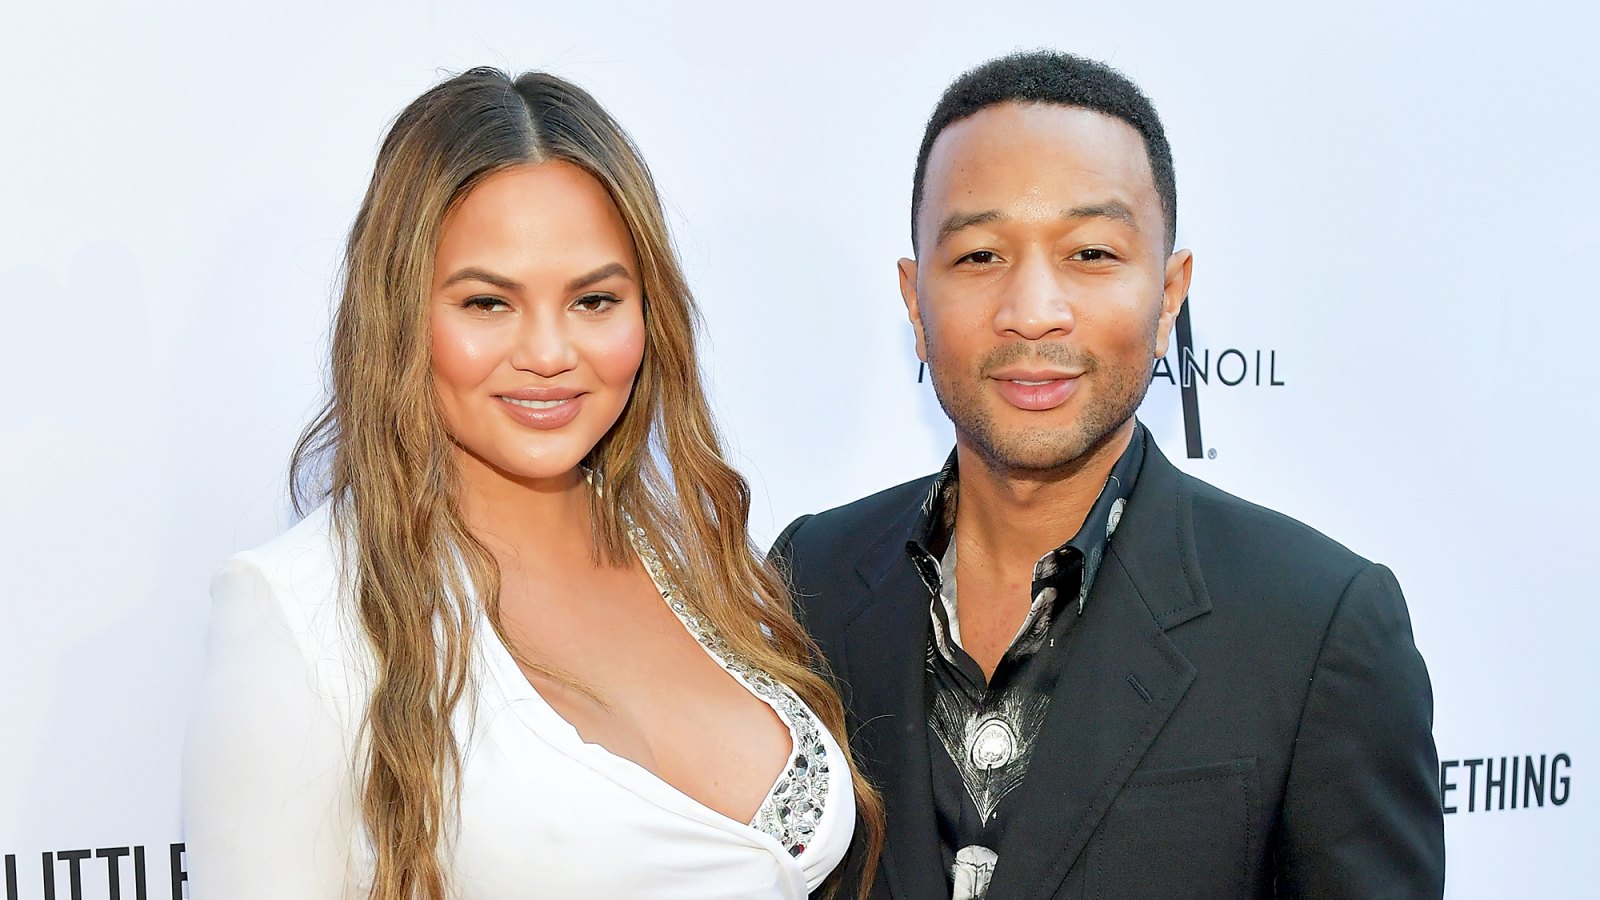 Chrissy Teigen and John Legend attend The Daily Front Row's 4th Annual Fashion Los Angeles Awards at Beverly Hills Hotel on April 8, 2018 in Beverly Hills, California.